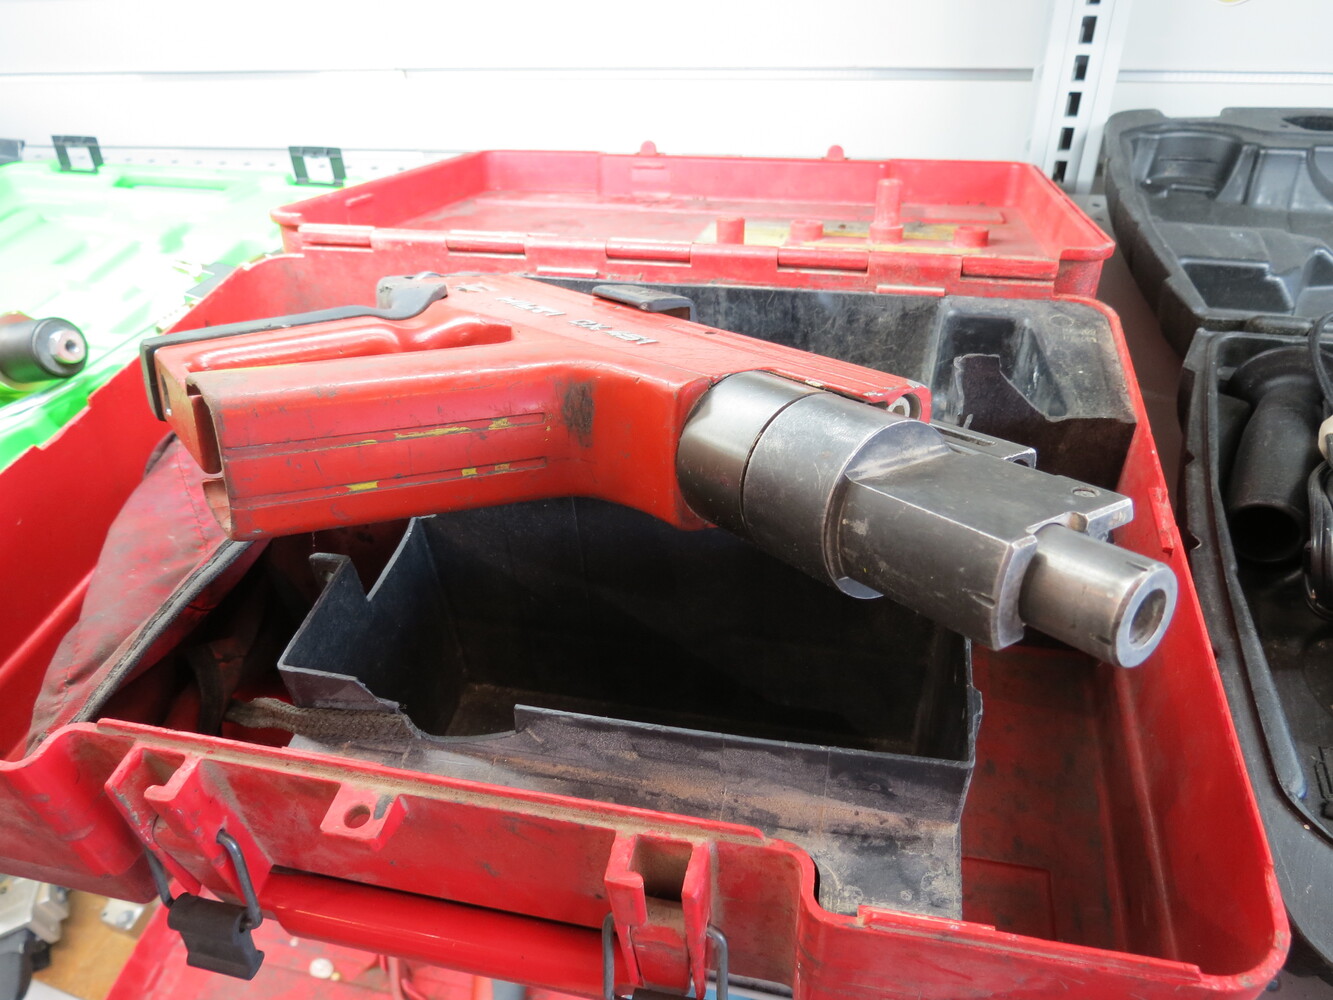 Hilti DX45 Power Actuated Tool with Accessories 